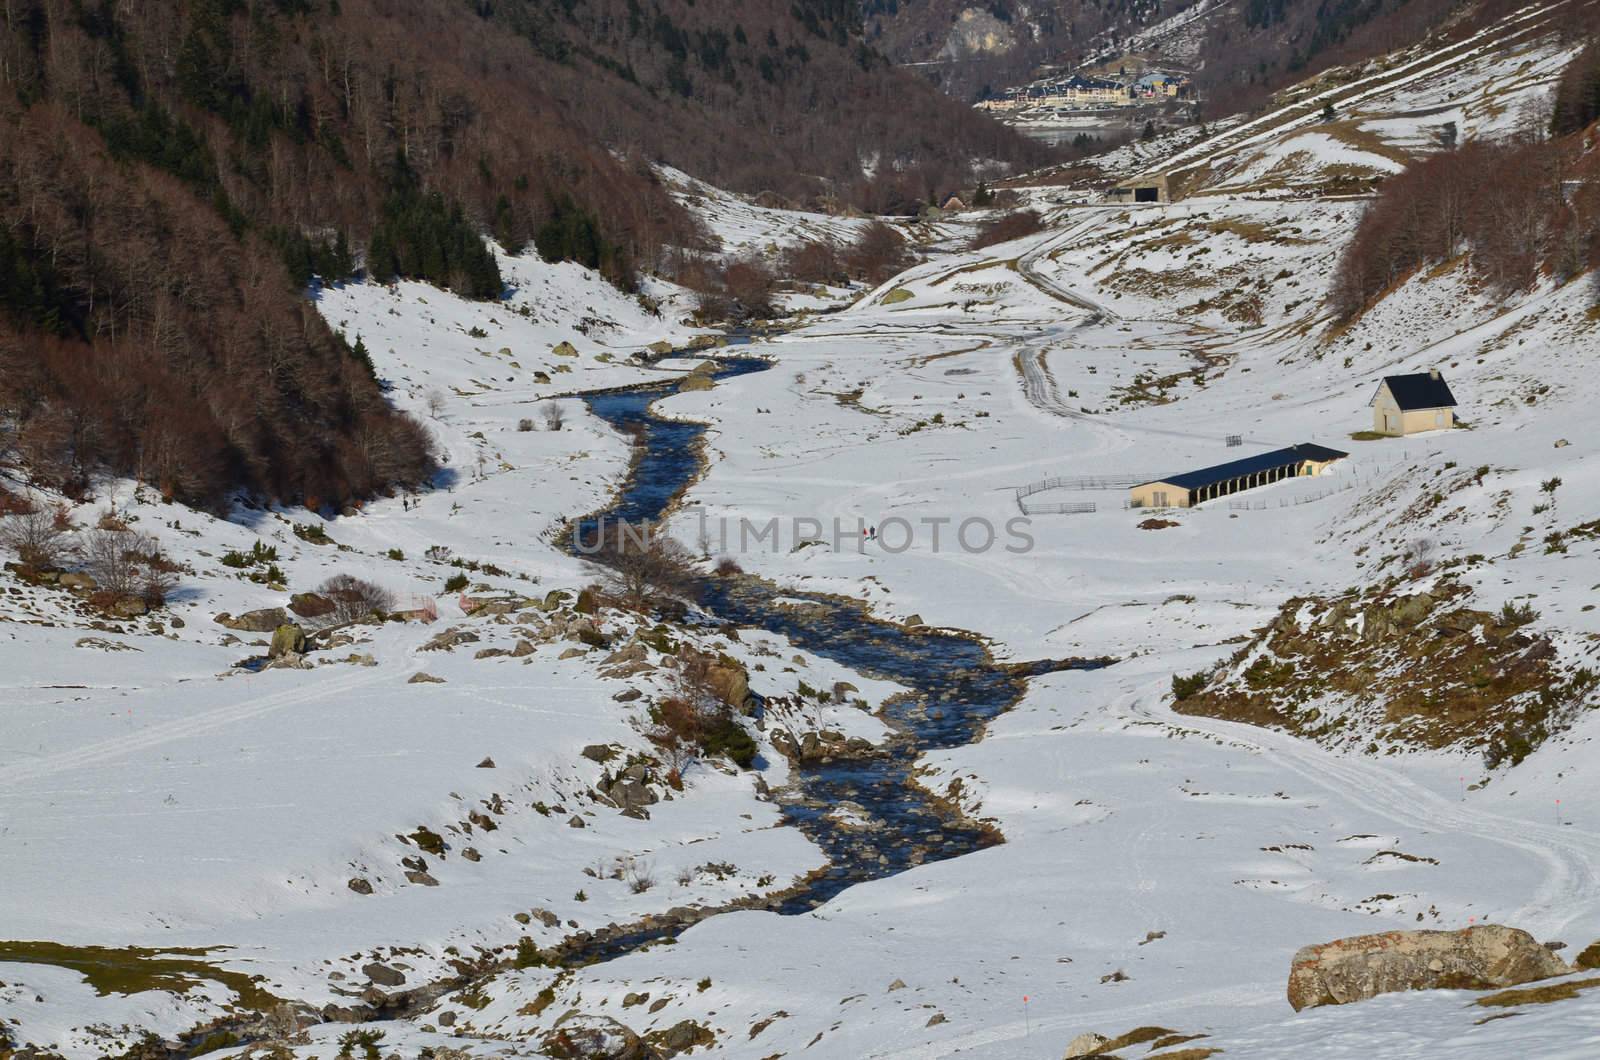 Winter Lanscape of Osseu valley (vallee d'Ossau) close to Col de Portalet,  , Atlantic Pyrenees, Aquitaine, Bearn, France. River Le gave d'Ossau, Farmers refuge and animal houses are in the down